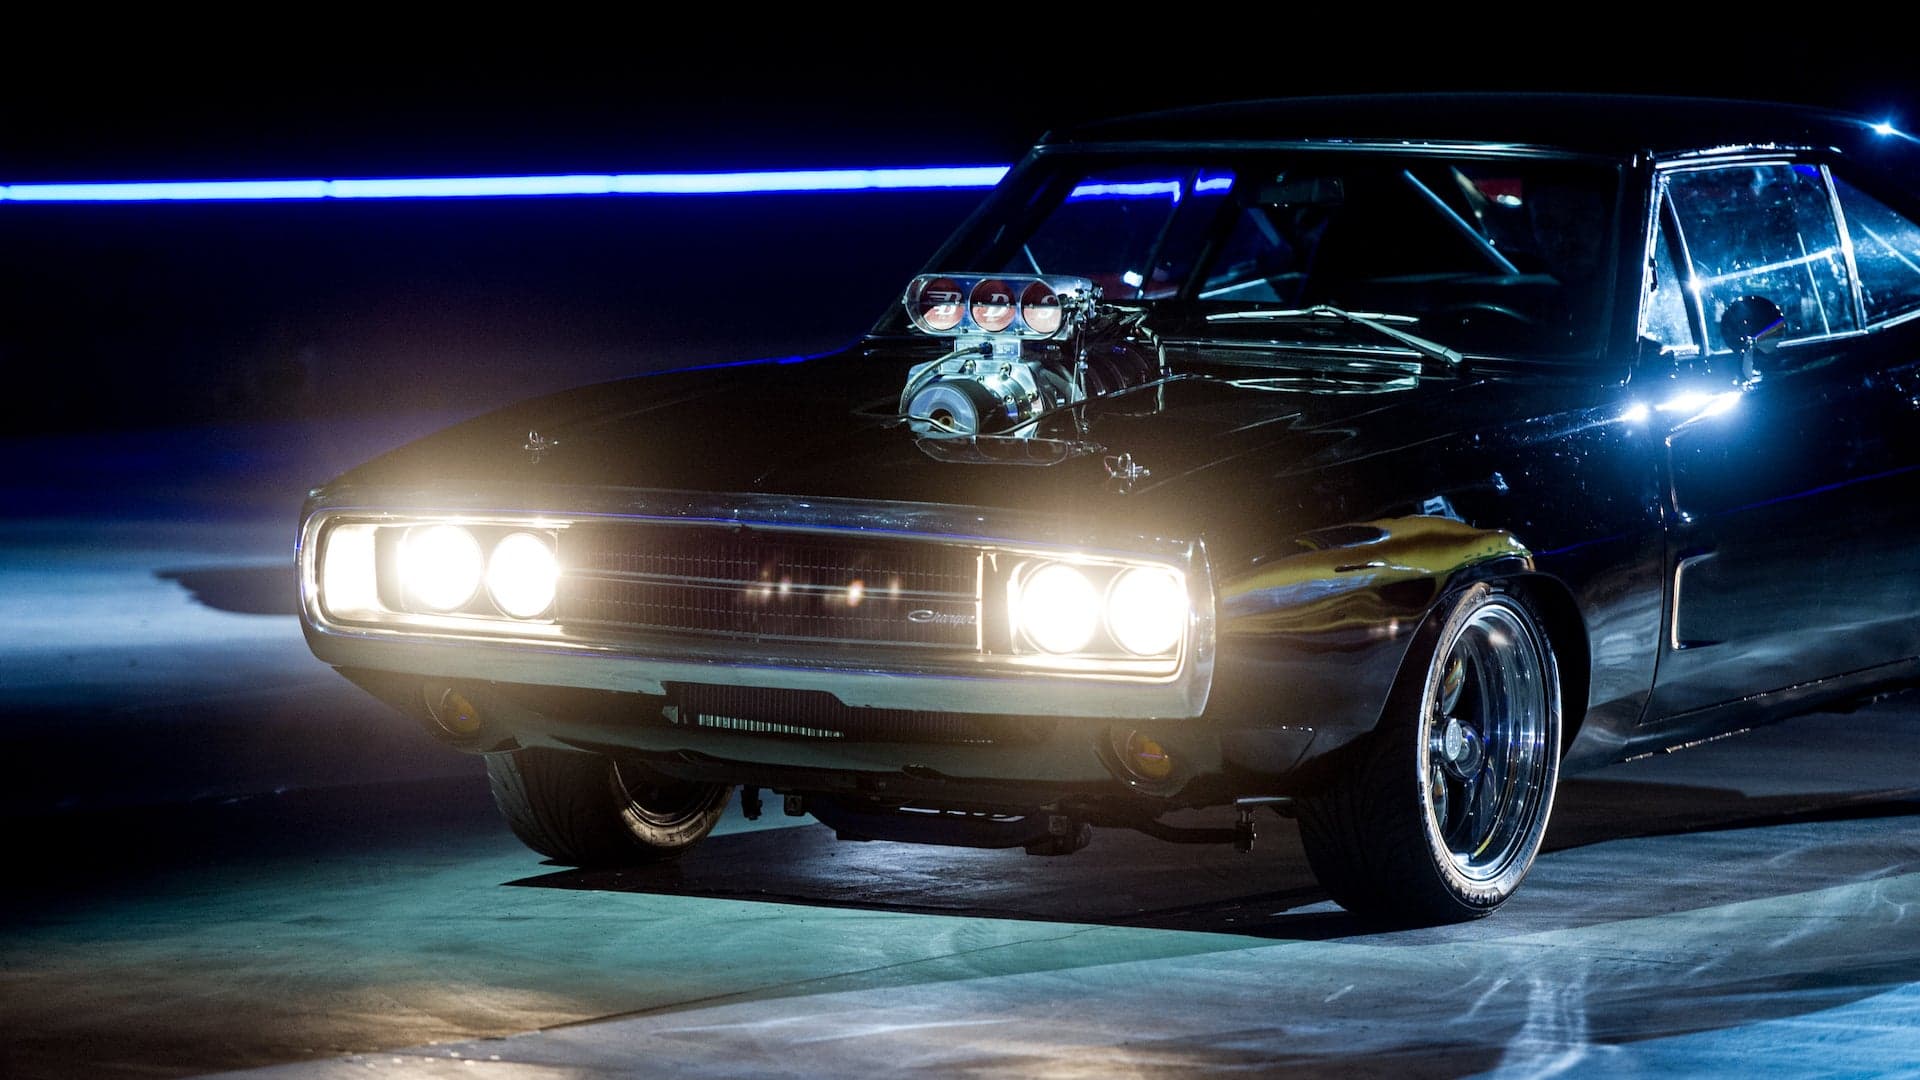 This Website Lists the Real Specs and Build Sheets For The Fast and the Furious Movie Cars